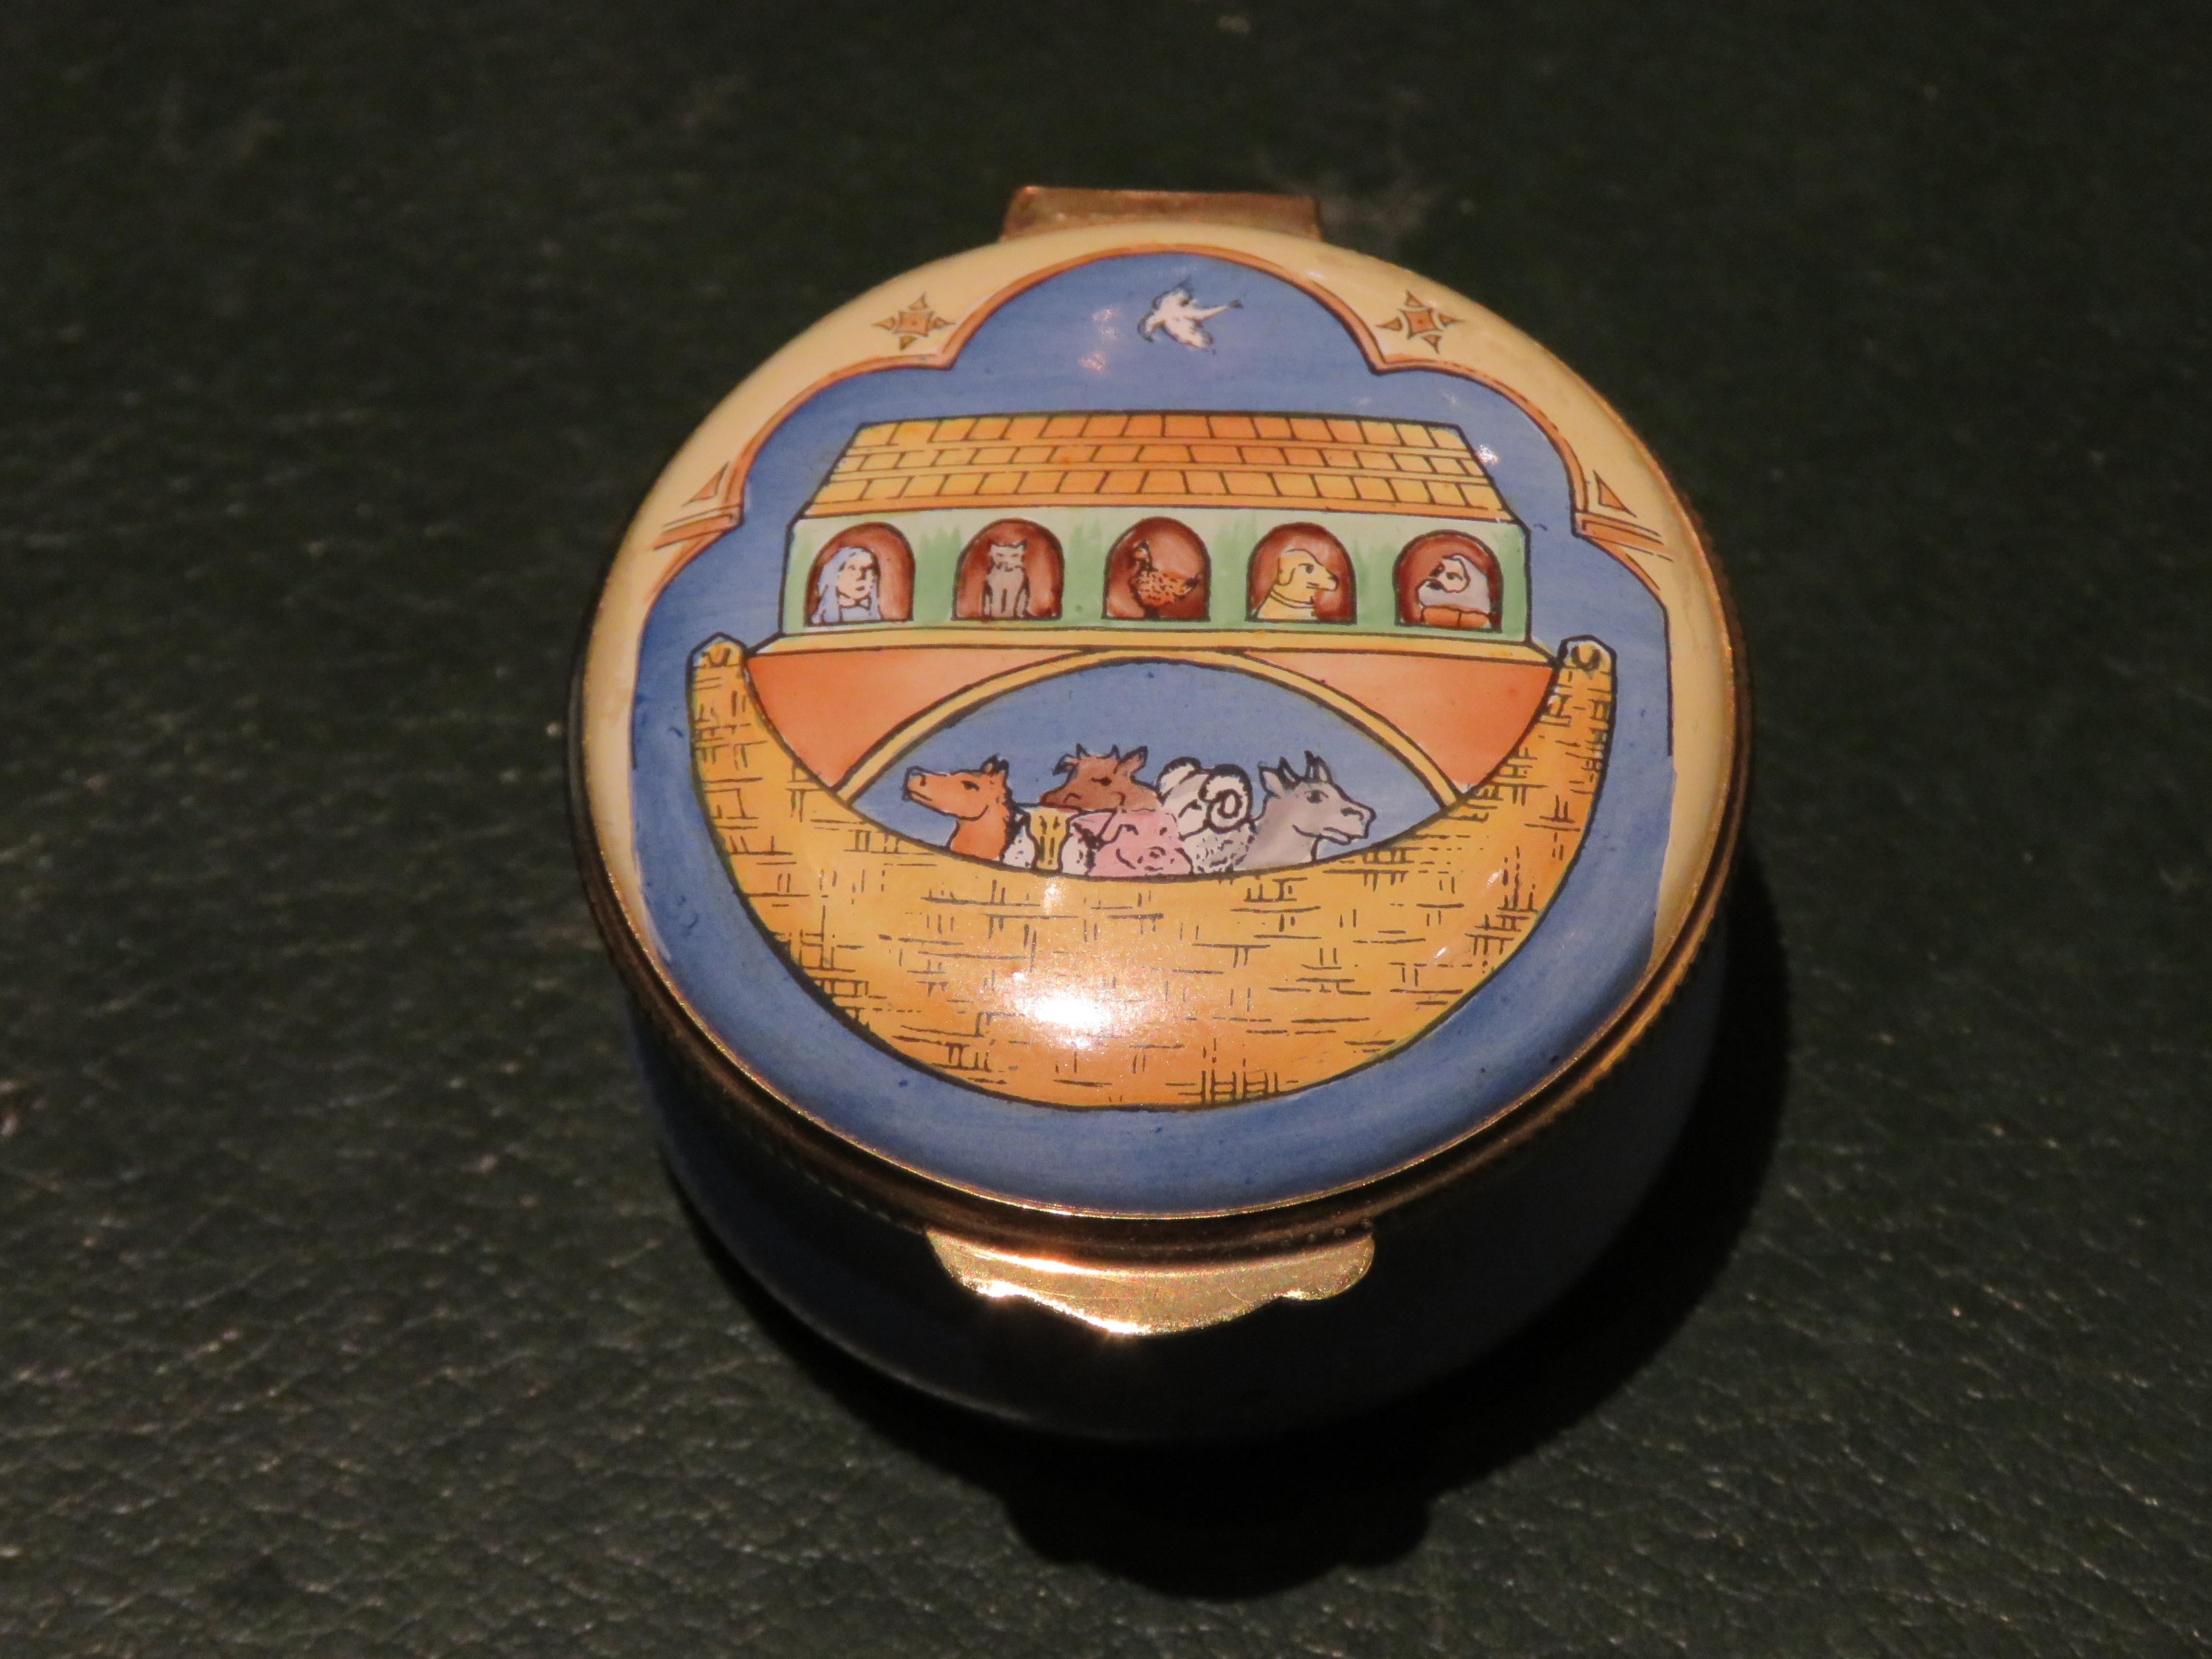 The Following Item that we are offering is A Beautiful and Unusual RARE COLLECTORS Handpainted Crummles Porcelain Box. Outstandingly done with Beautifully Colors featuring Noah's Ark. Taken out of a Upper East Side New York City Collection. A